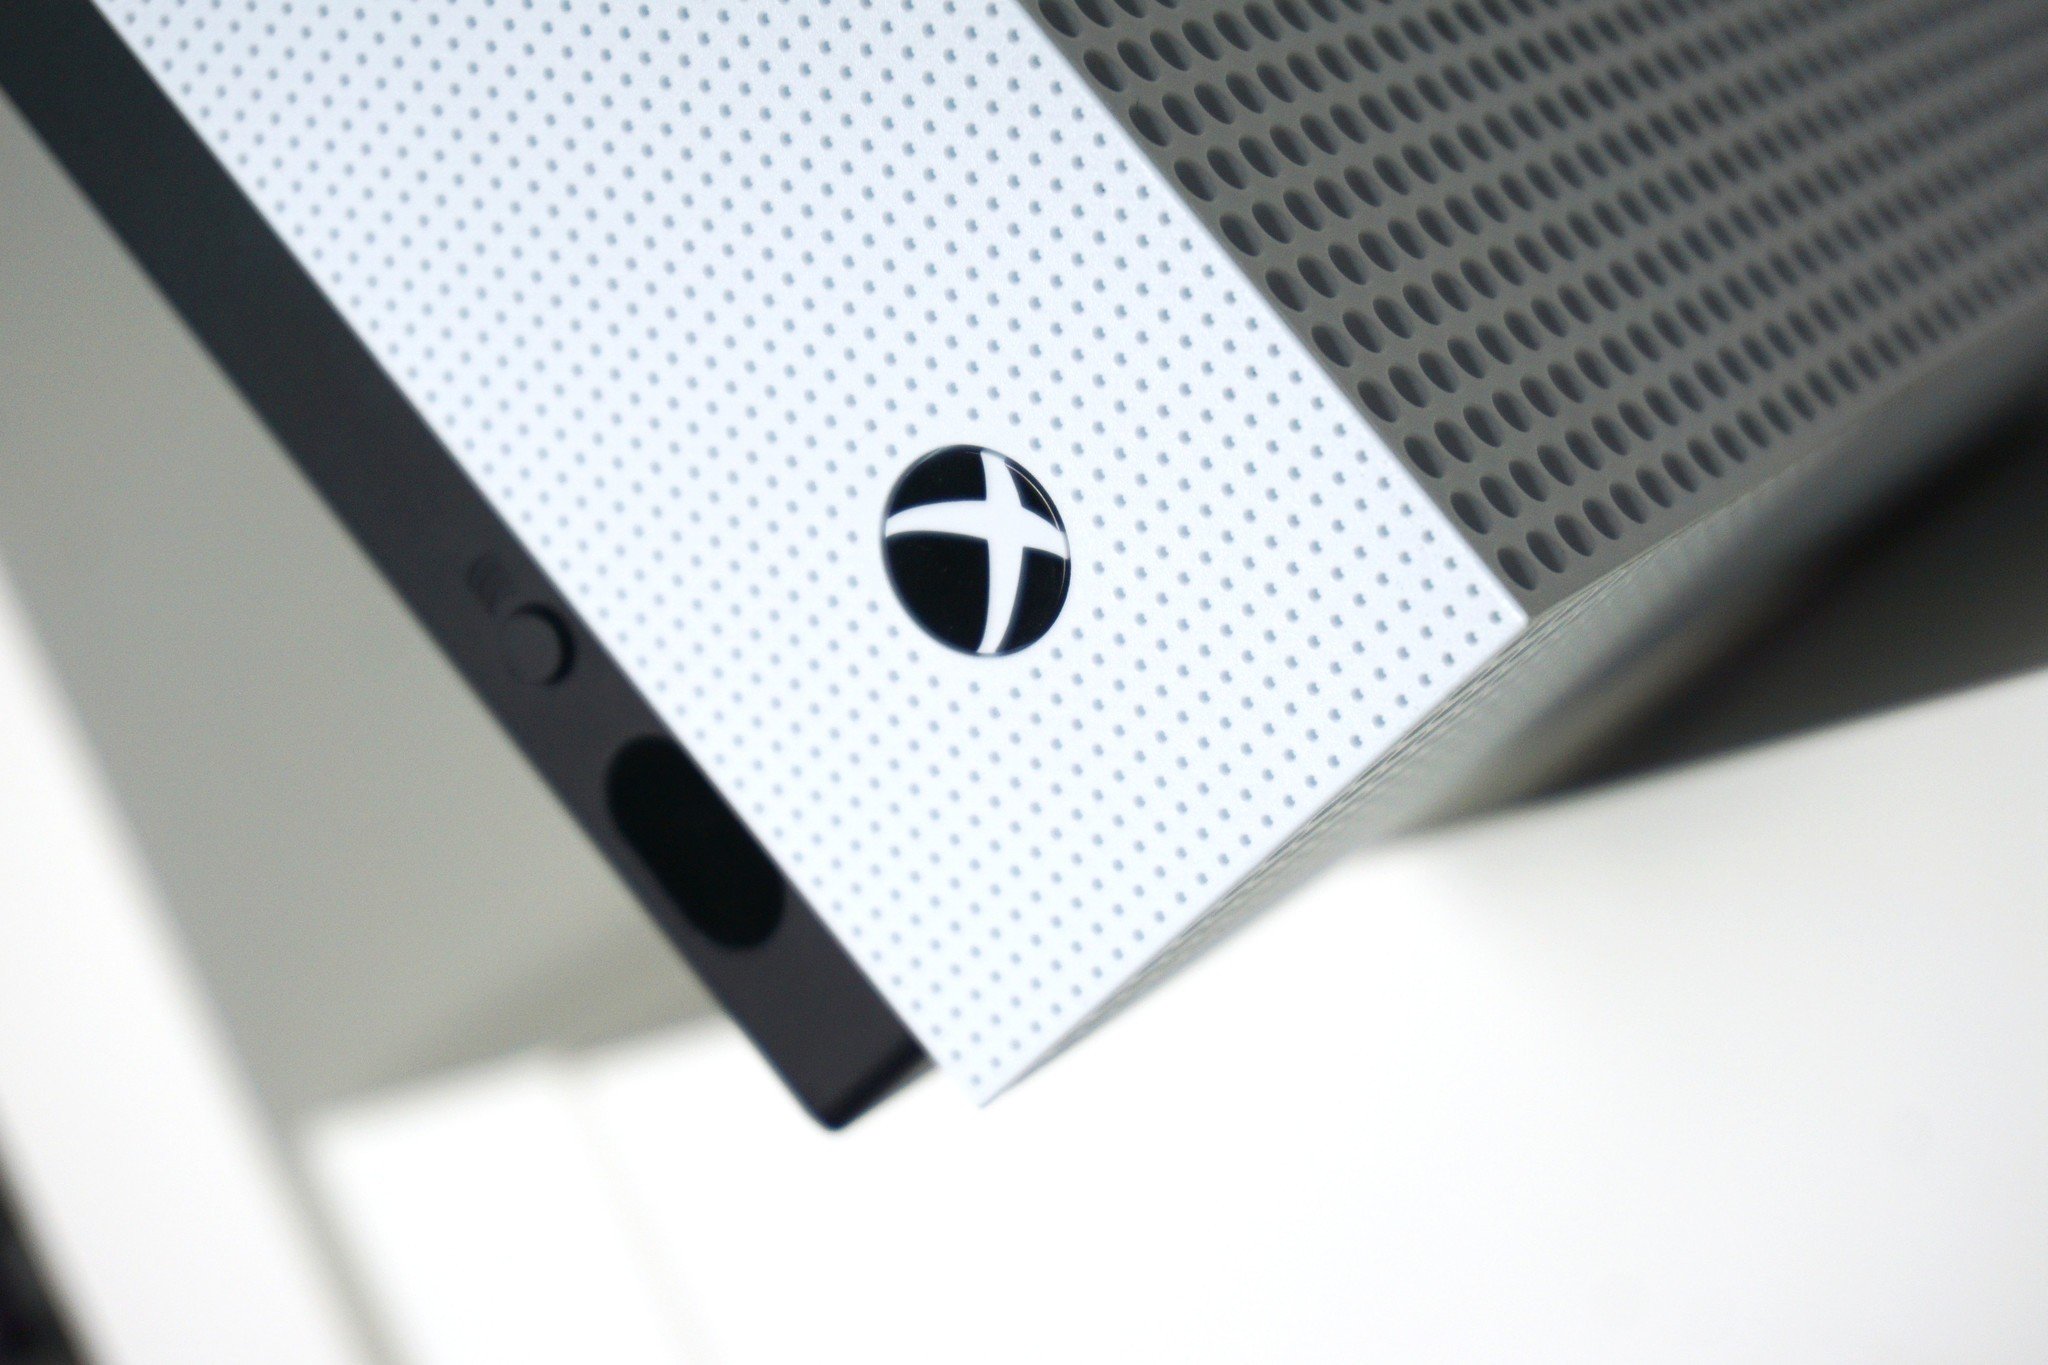 Does the original Xbox One still have what it takes to run modern